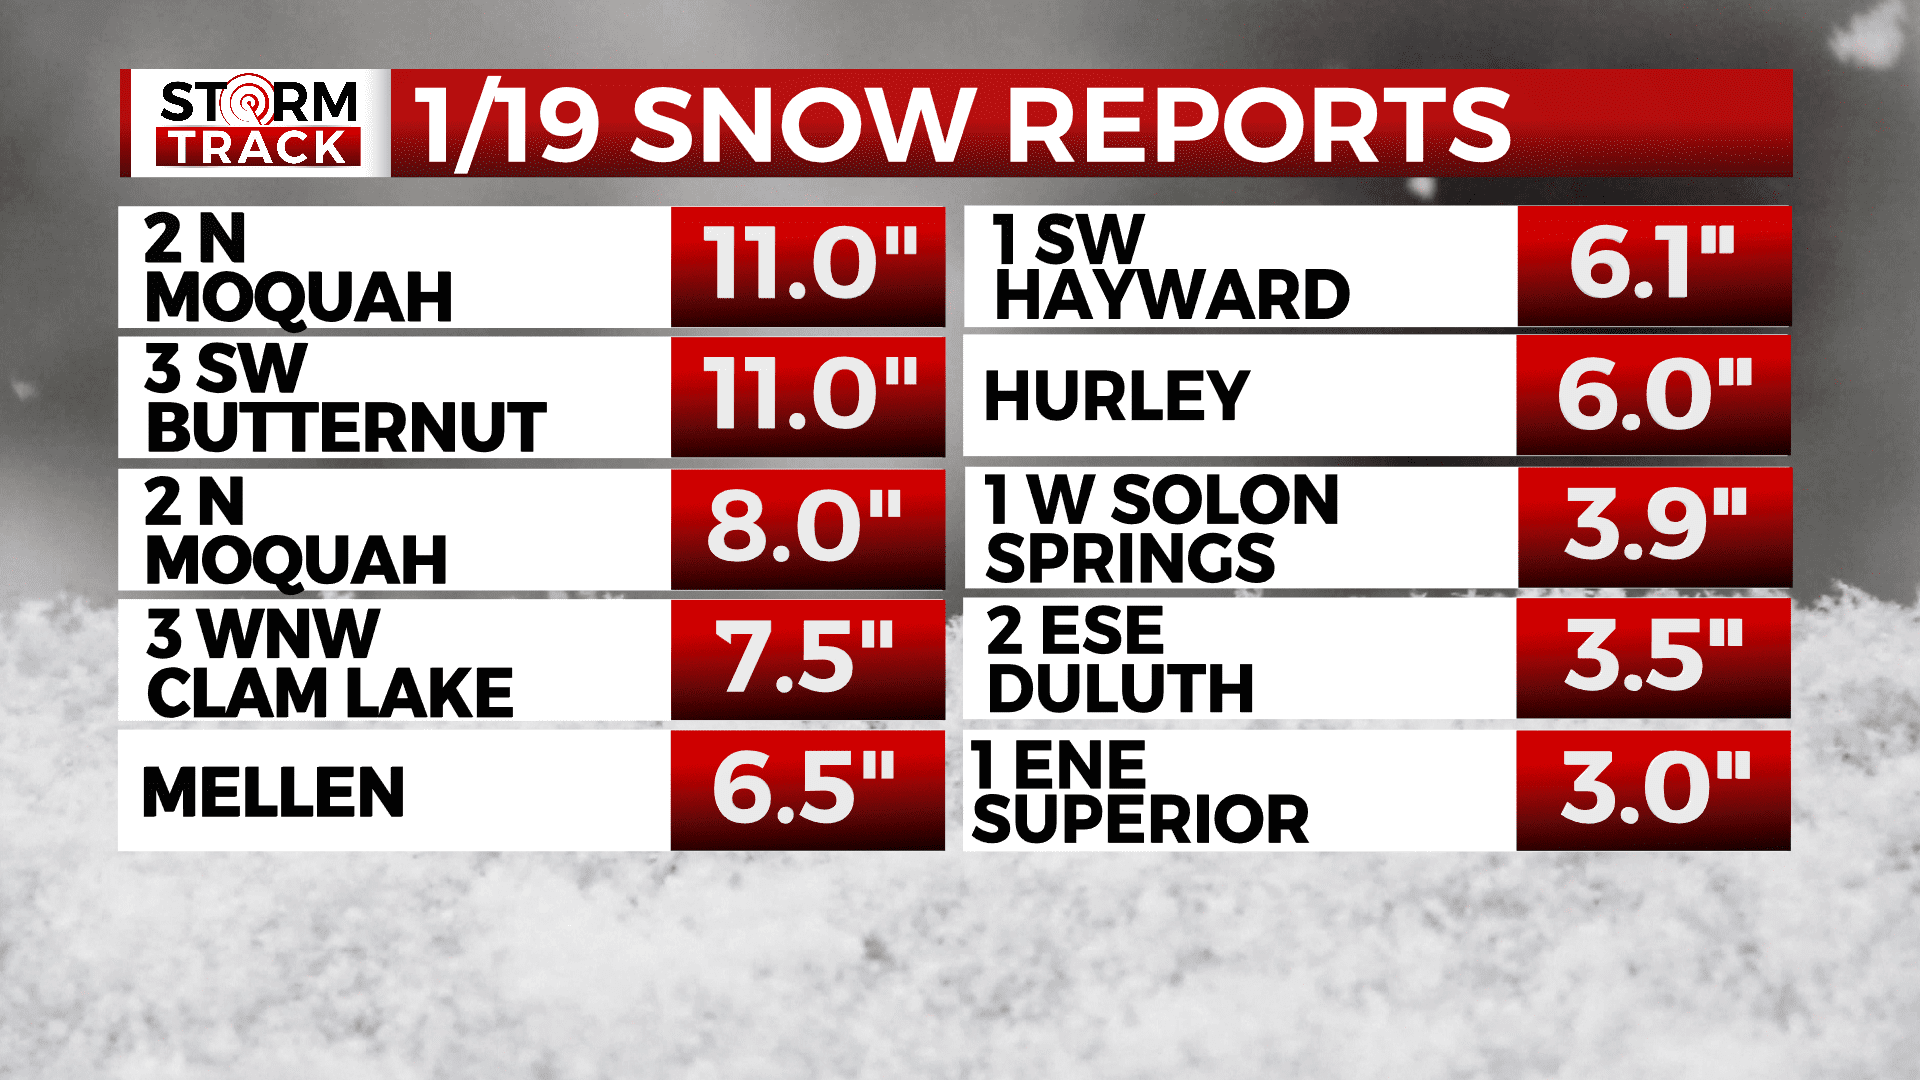 Snow reports for January 19